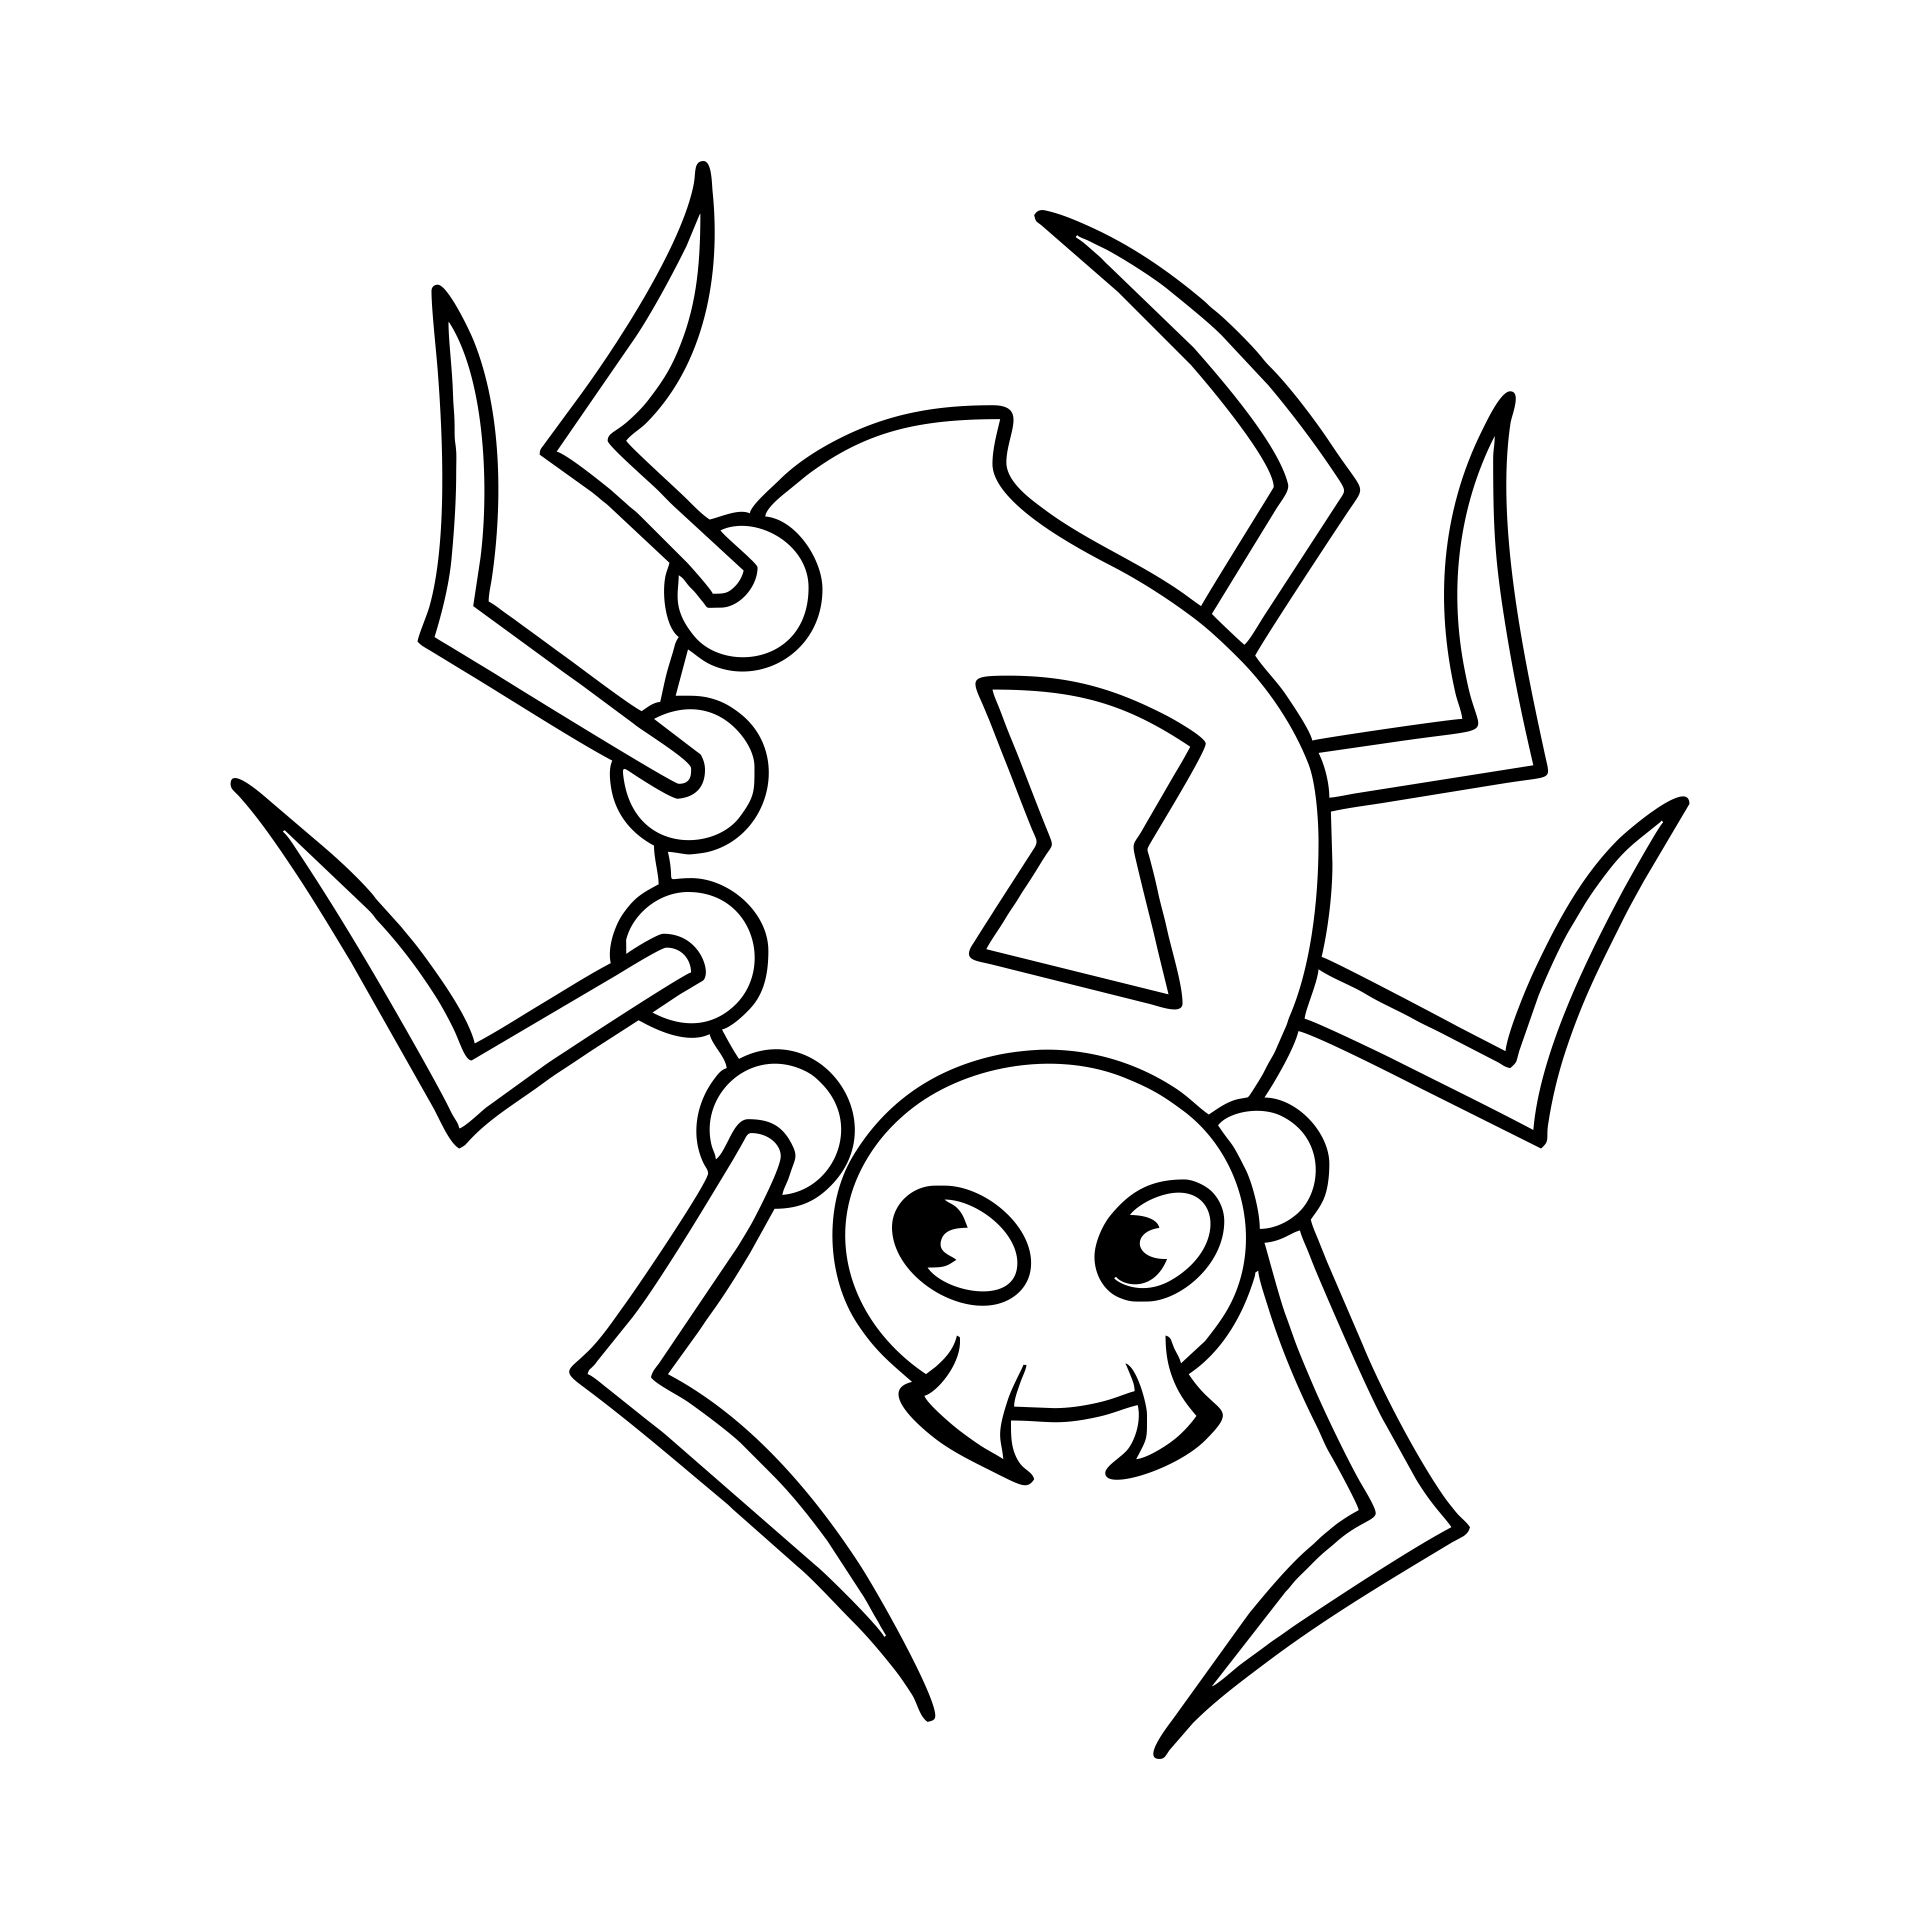 Printable Spider Coloring Pages